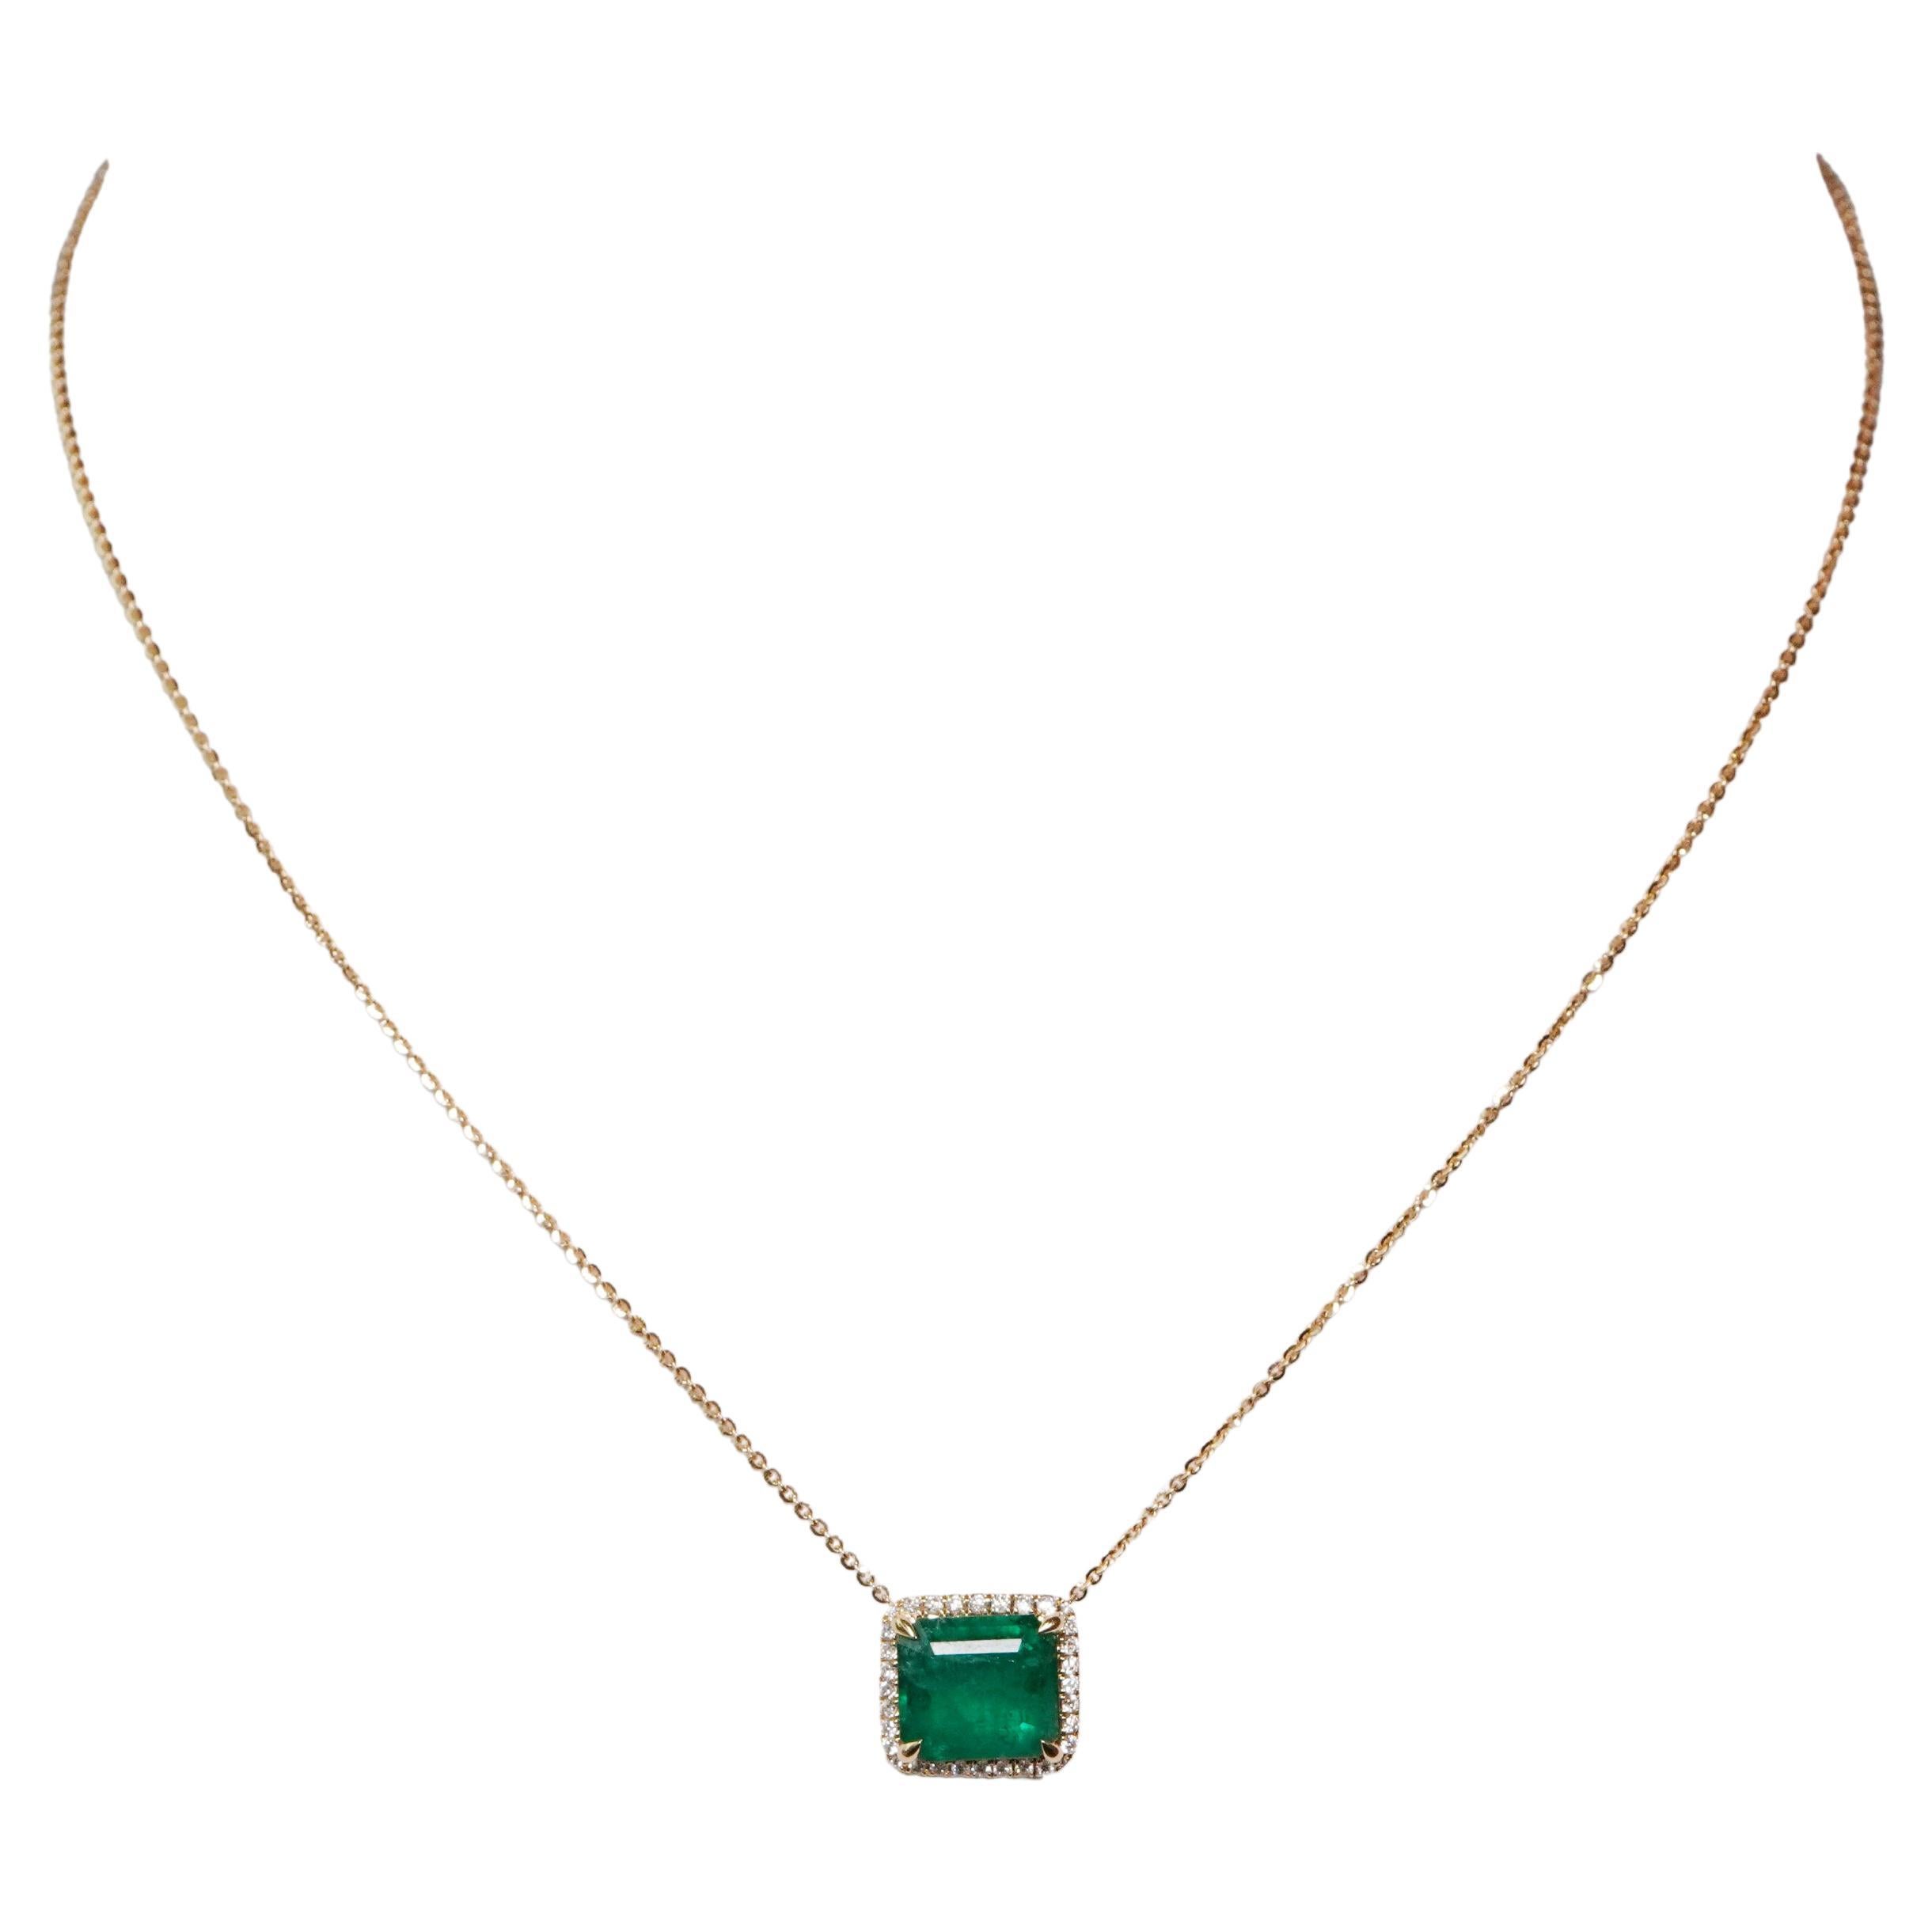 18K Yellow Gold Necklace With Emerald 3.46 ct. For Sale